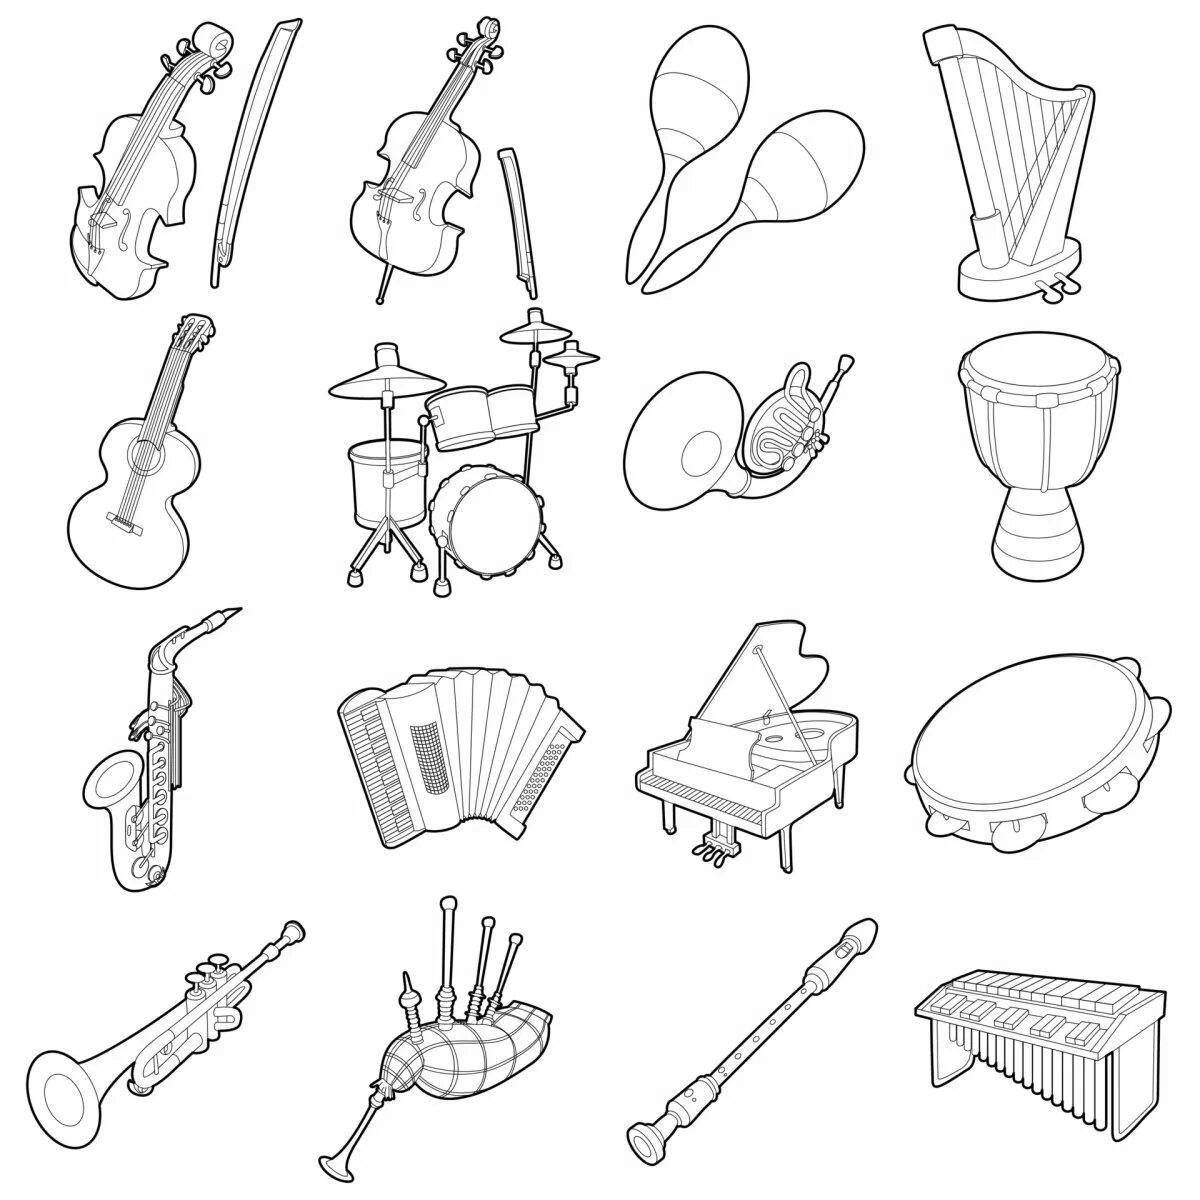 Creative coloring pages of Russian folk instruments for kids